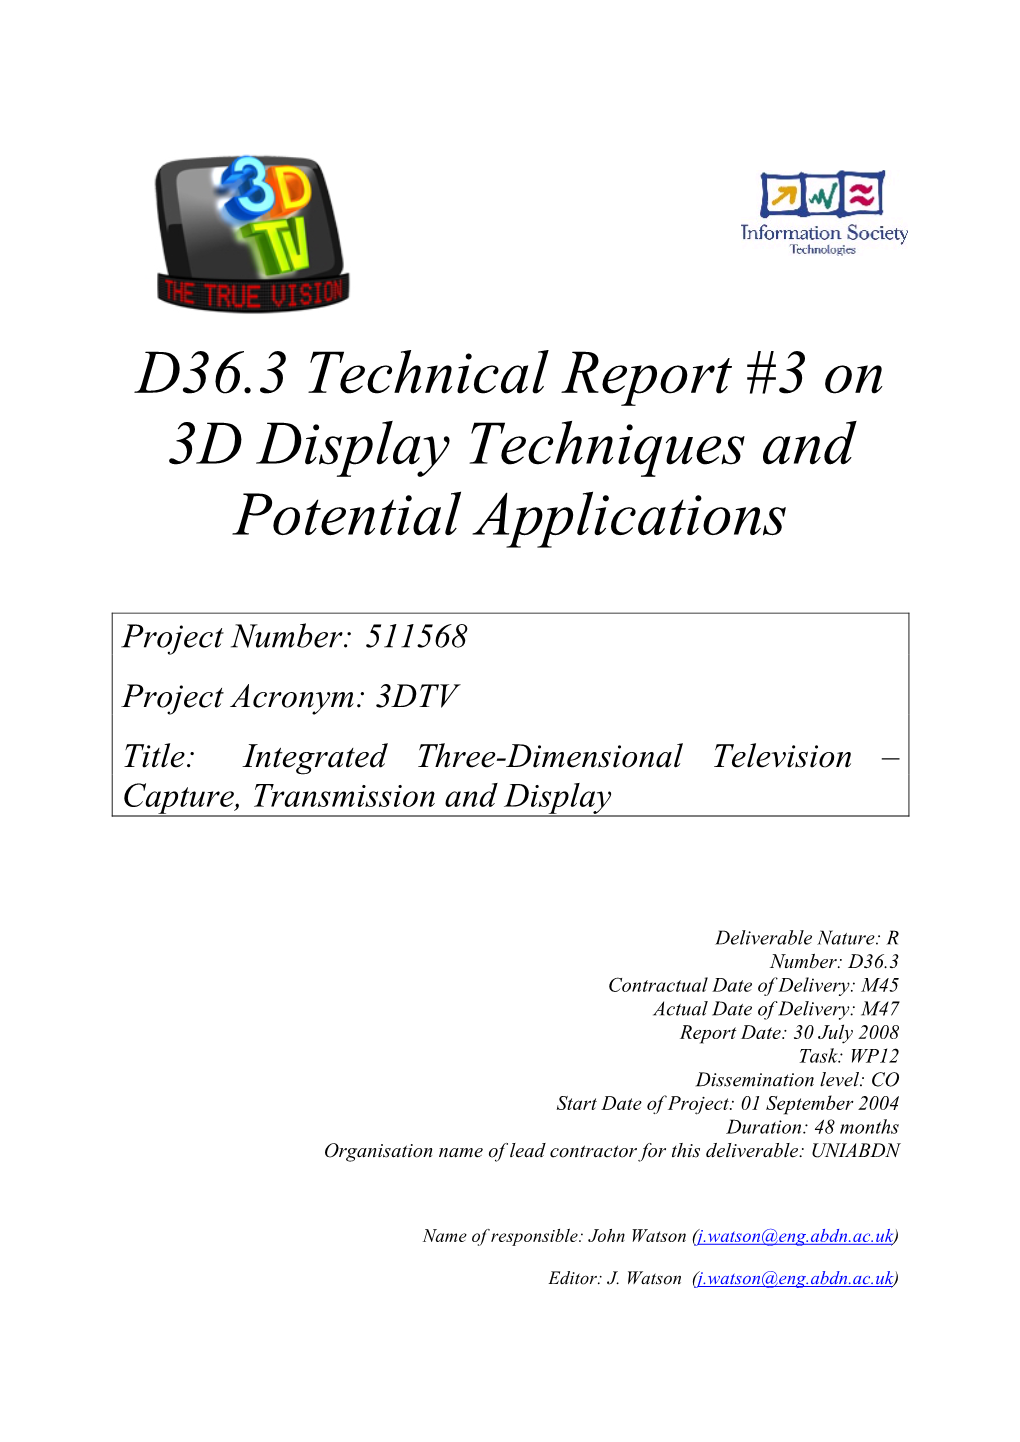 D36.3 Technical Report #3 on 3D Display Techniques and Potential Applications